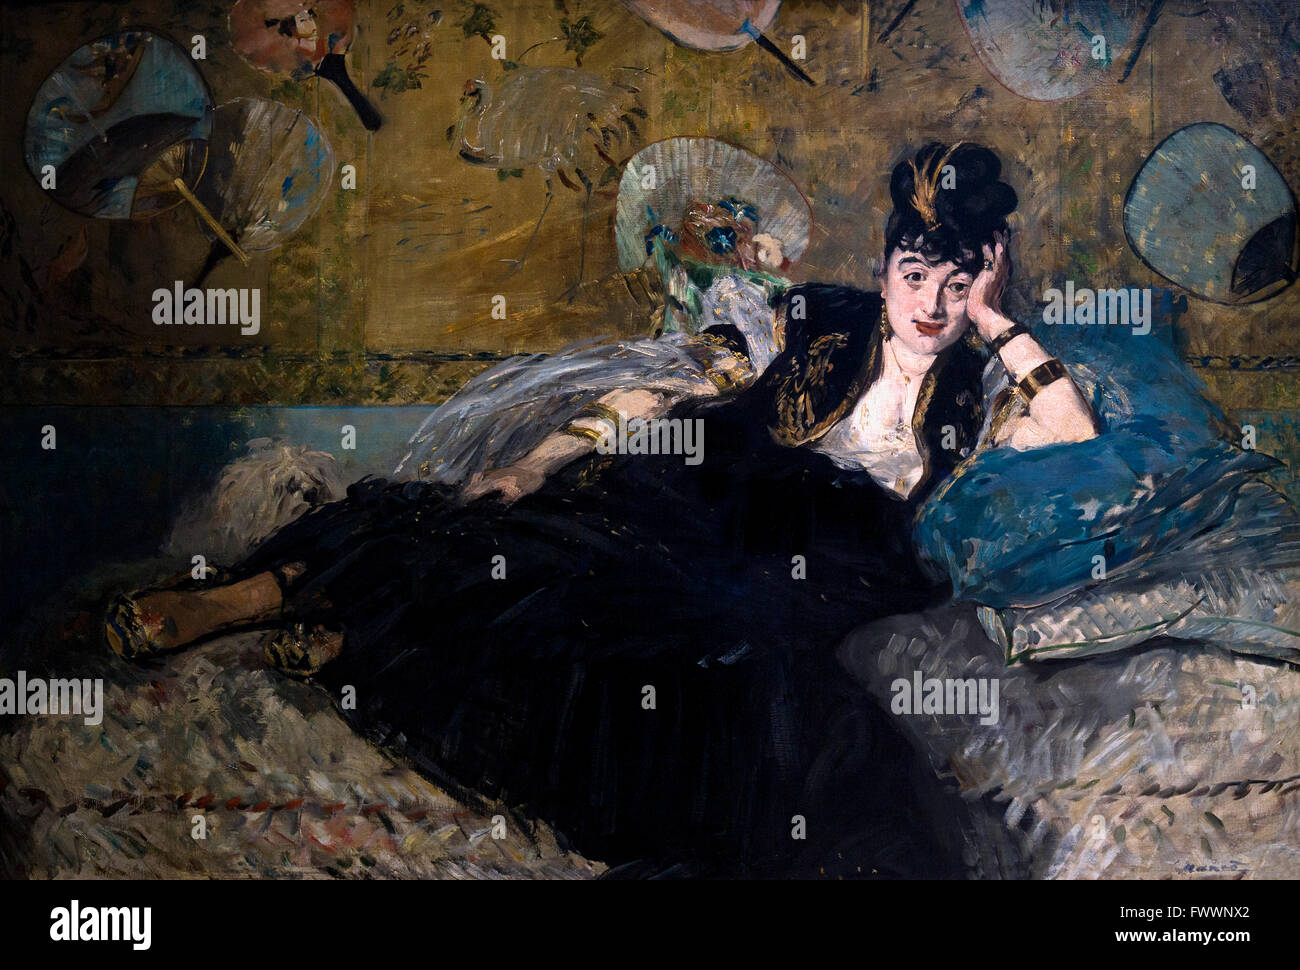 Lady with Fans, La Dame aux Eventails, Edouard Manet, 1873, Musee D'Orsay Paris France Europe Stock Photo